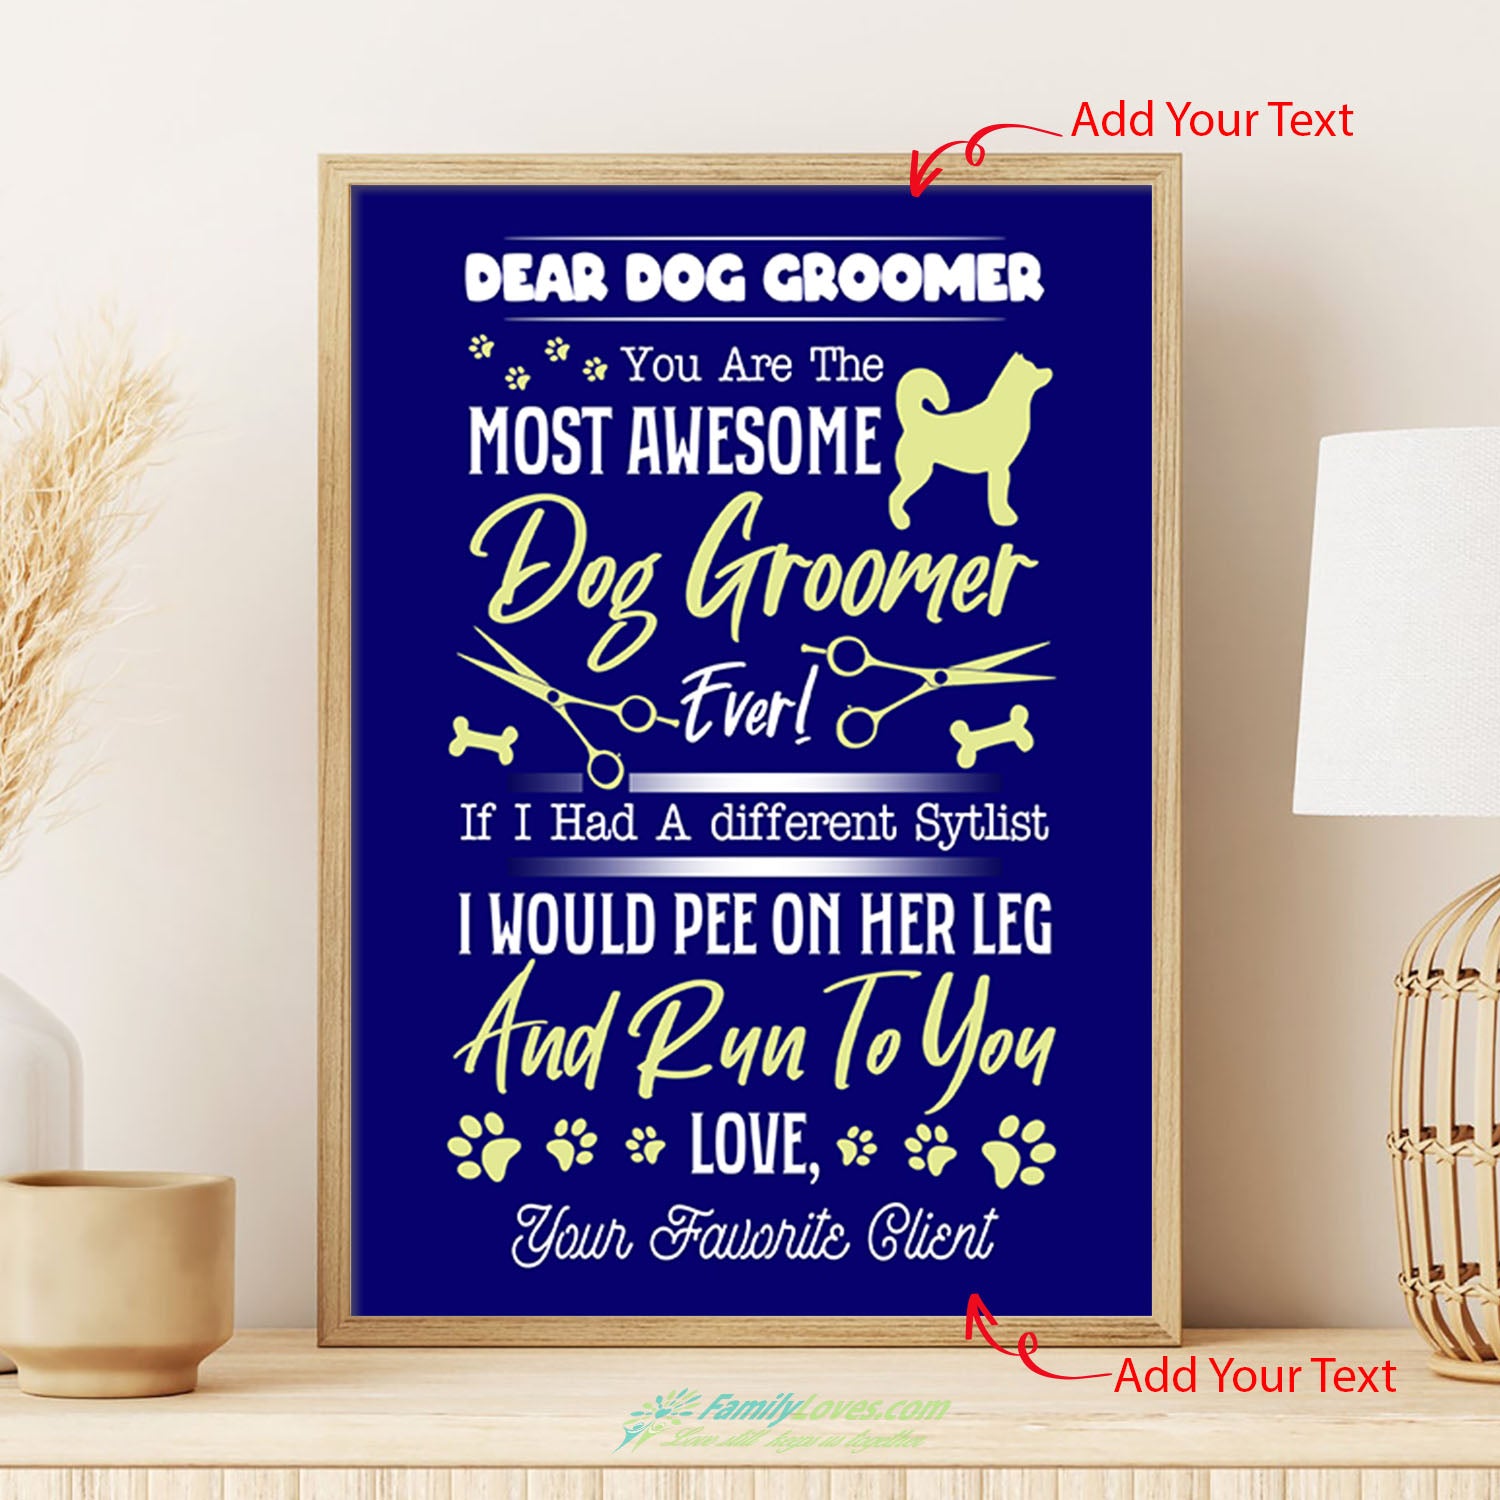 Dear Dog Groomer Canvas Boards White Poster Board All Size 1